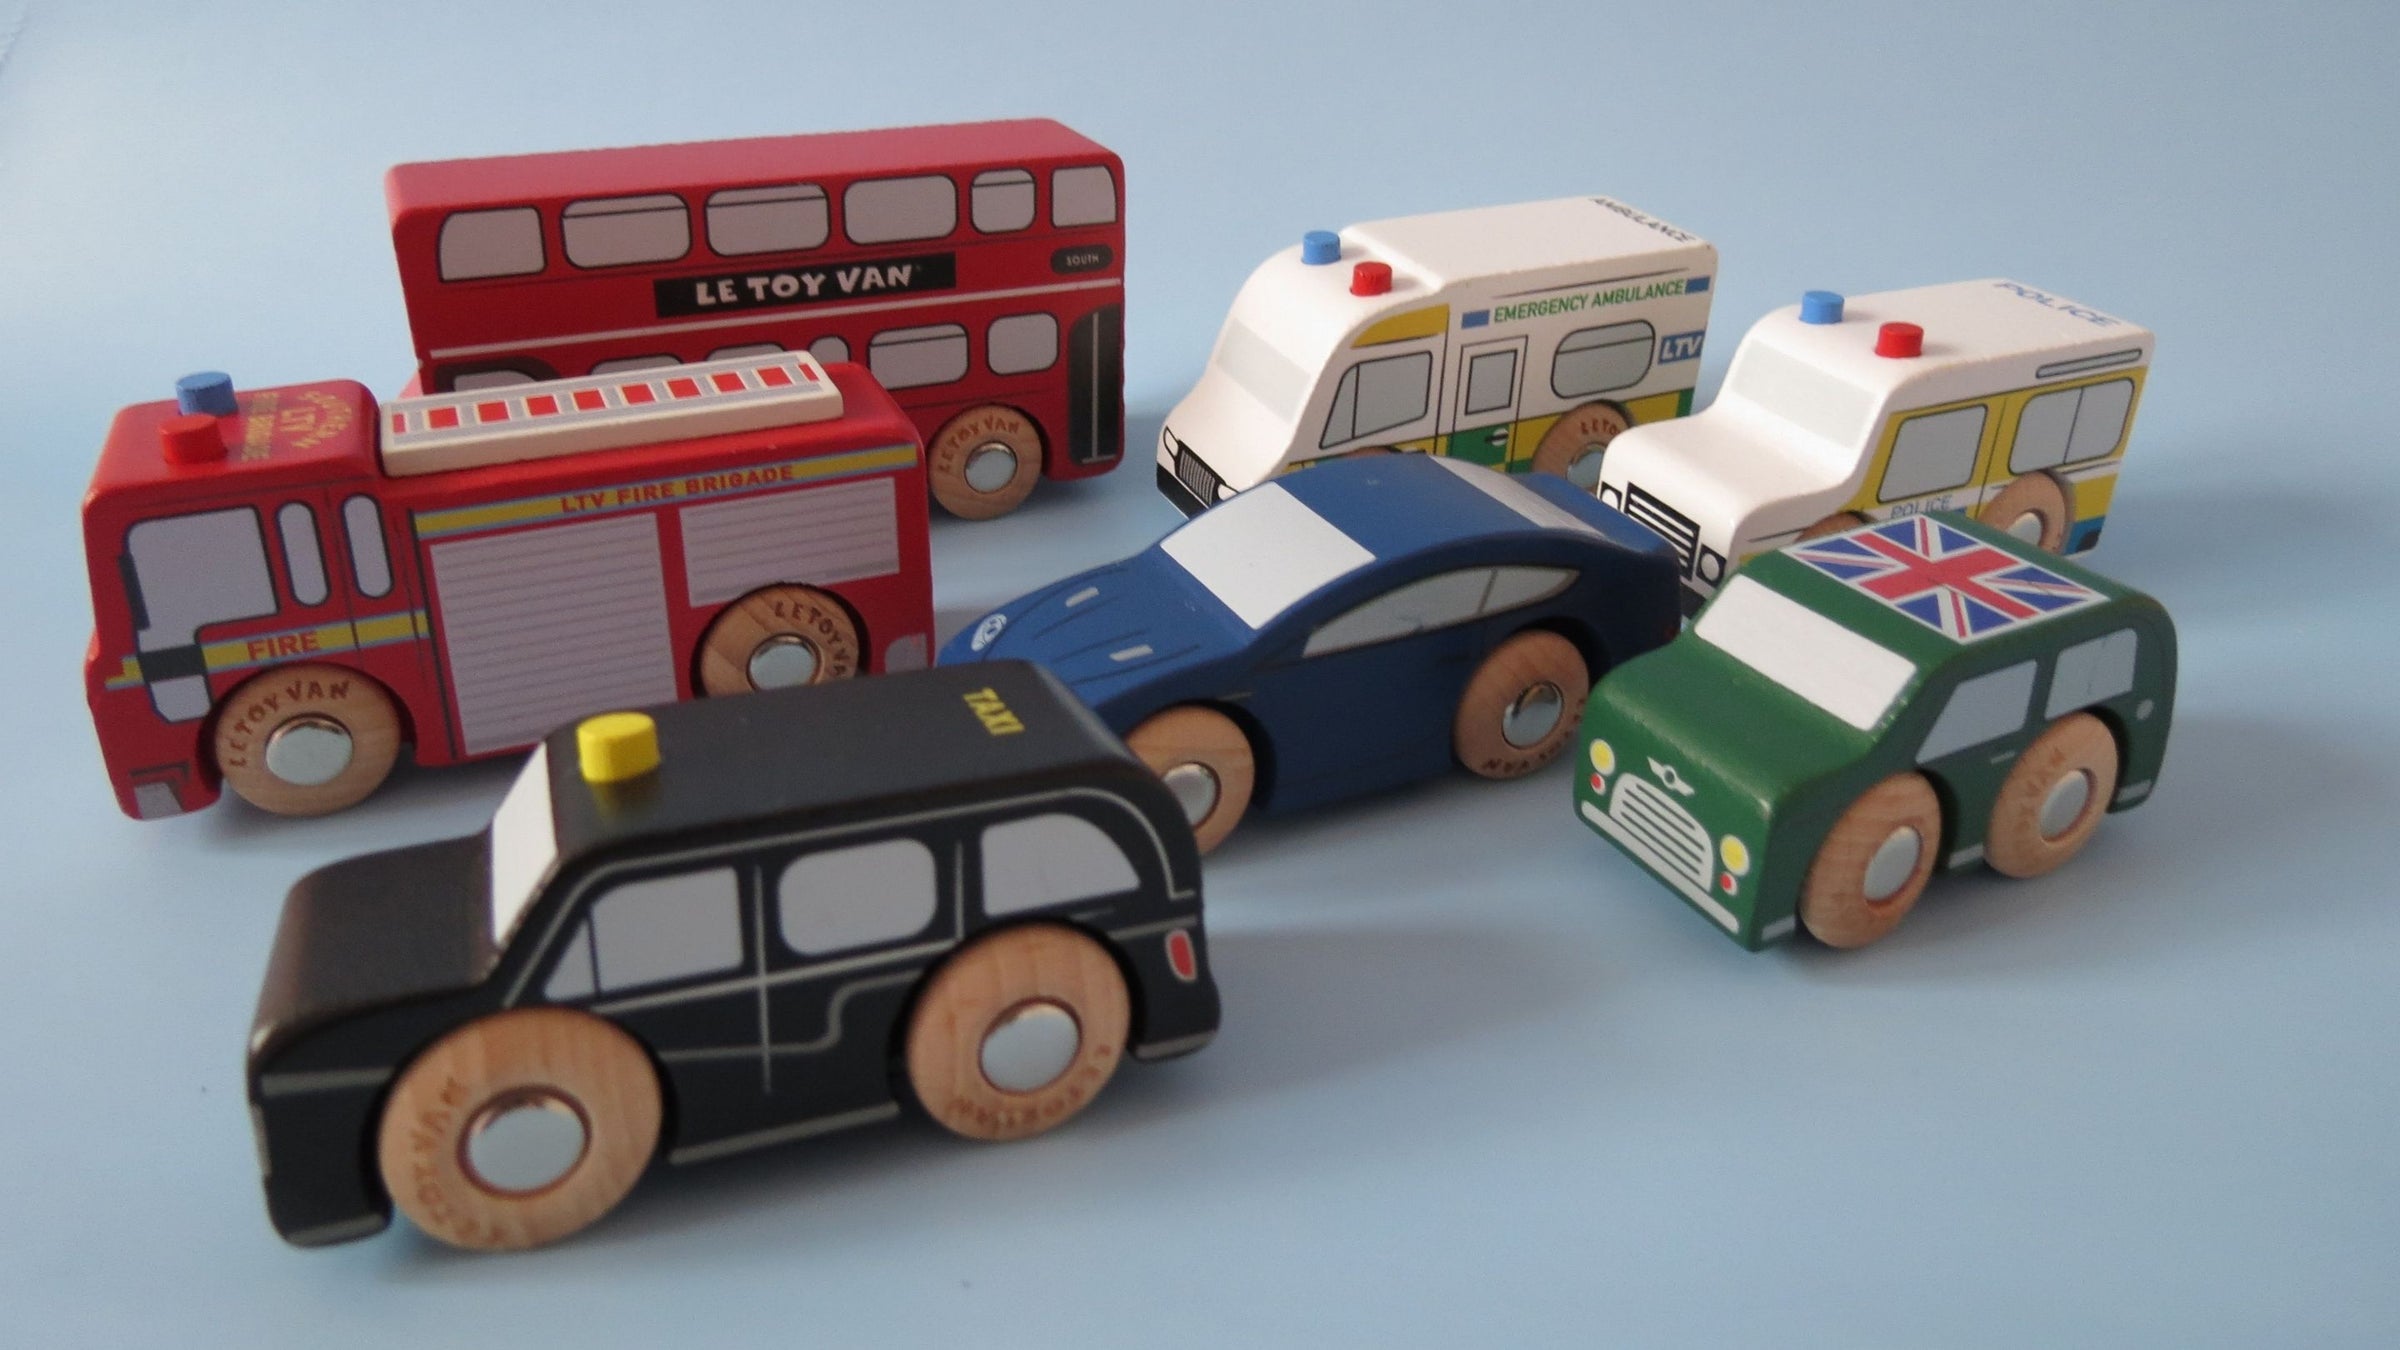 Le Toy Van Collection | Premium Wooden Toys & Playsets